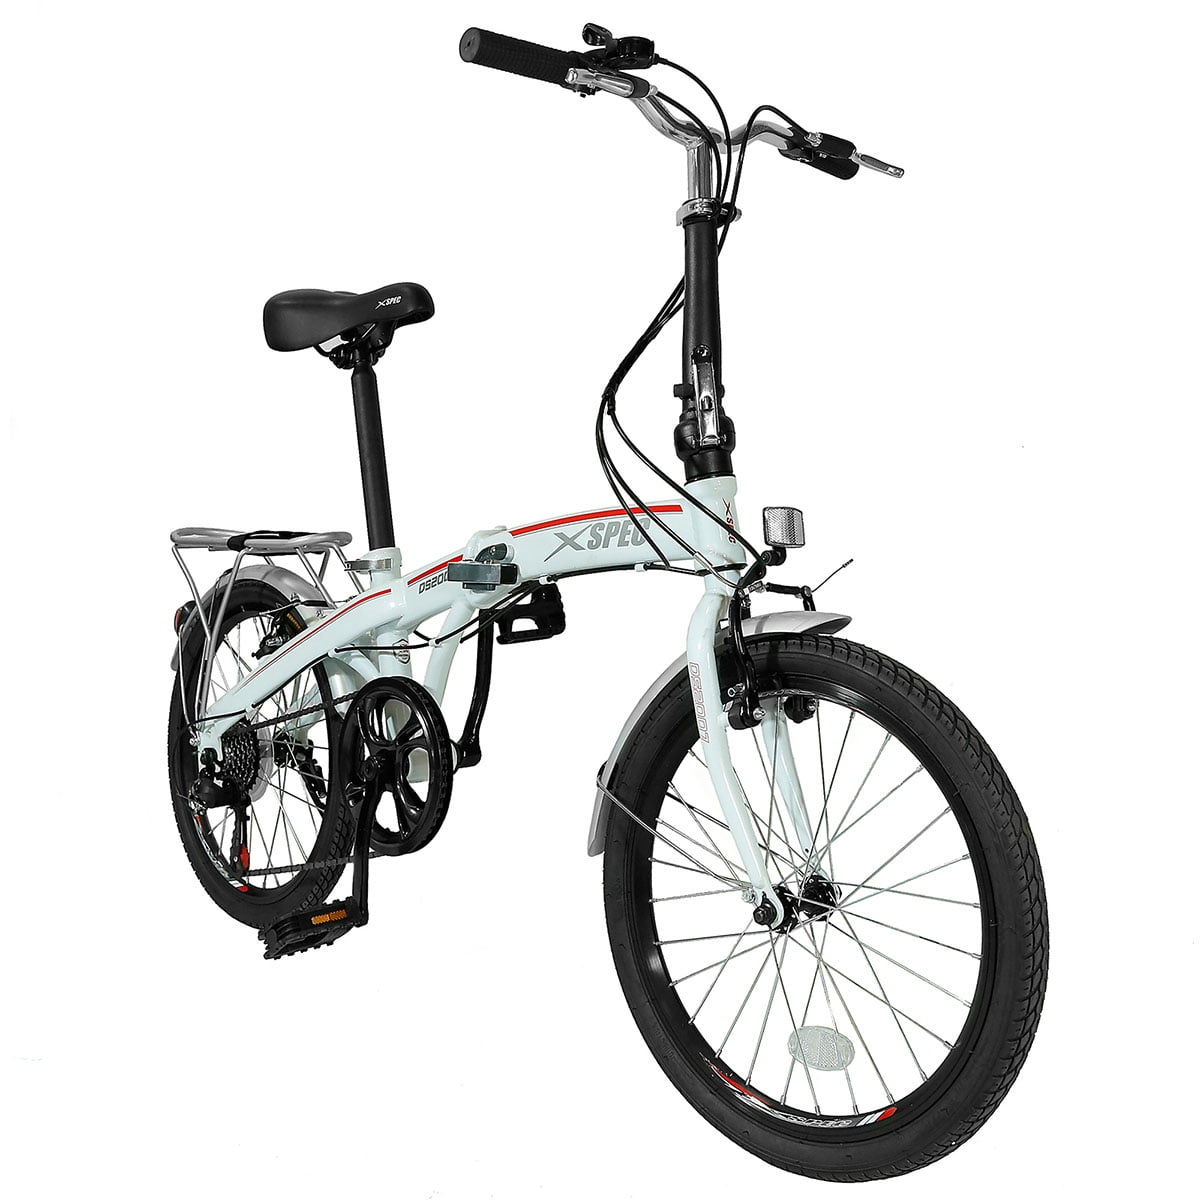 20" 7 Speed City Folding Mini Compact Bike Bicycle Commuter Road Cycling 